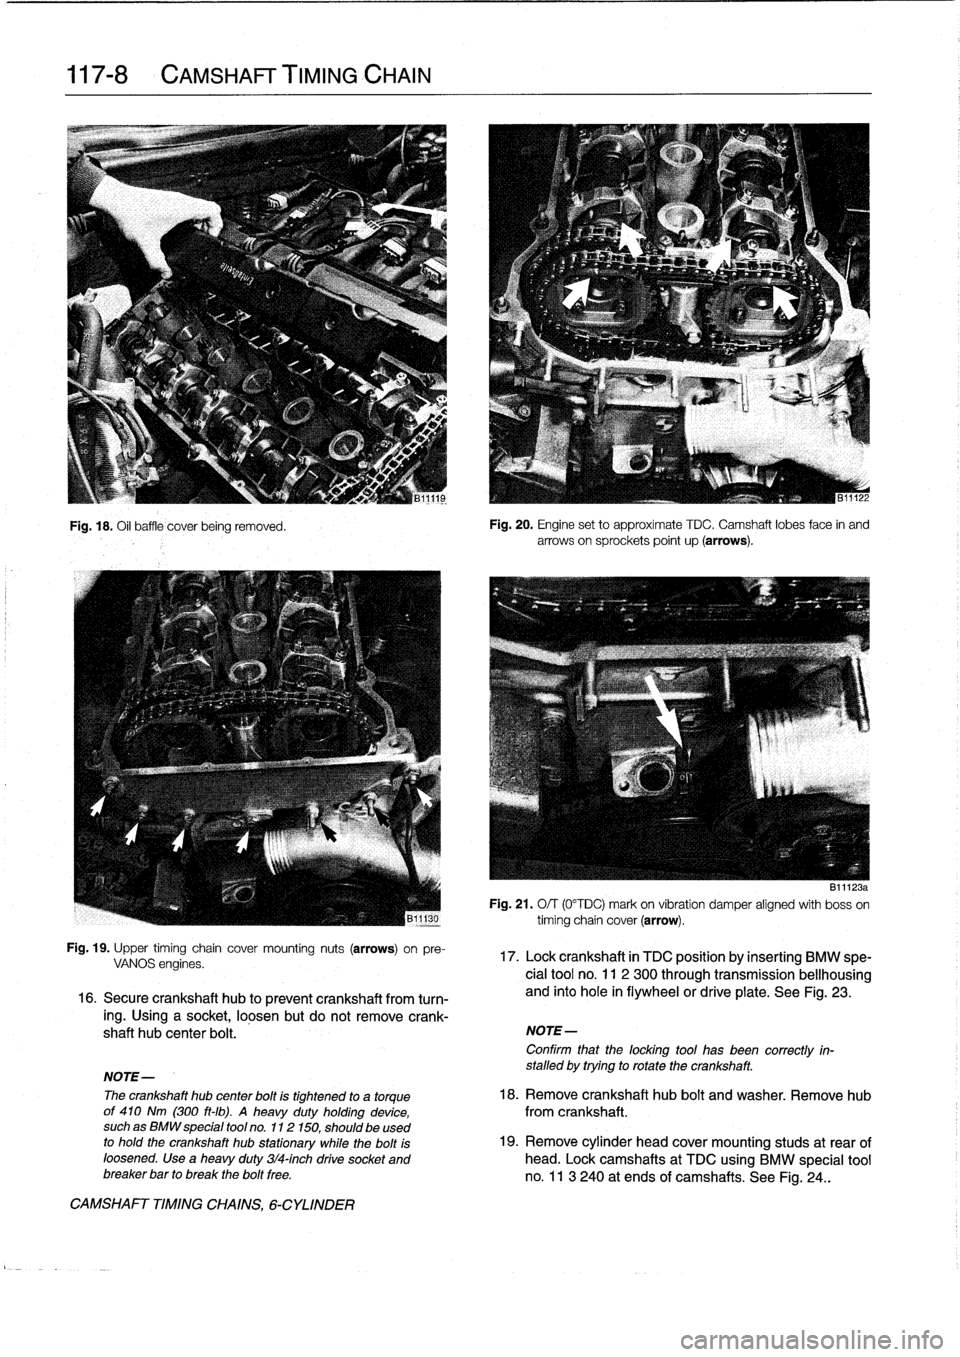 BMW 318i 1997 E36 Workshop Manual 
117-
8

	

CAMSHAFT
TIMING
CHAIN

Fig
.
18
.
Oil
baffle
cover
being
removed
.

Fig
.
19
.
Upper
timing
chaincover
mounting
nuts
(arrows)
on
pre-
VANOS
engines
.

16
.
Secure
crankshaft
hub
to
preven